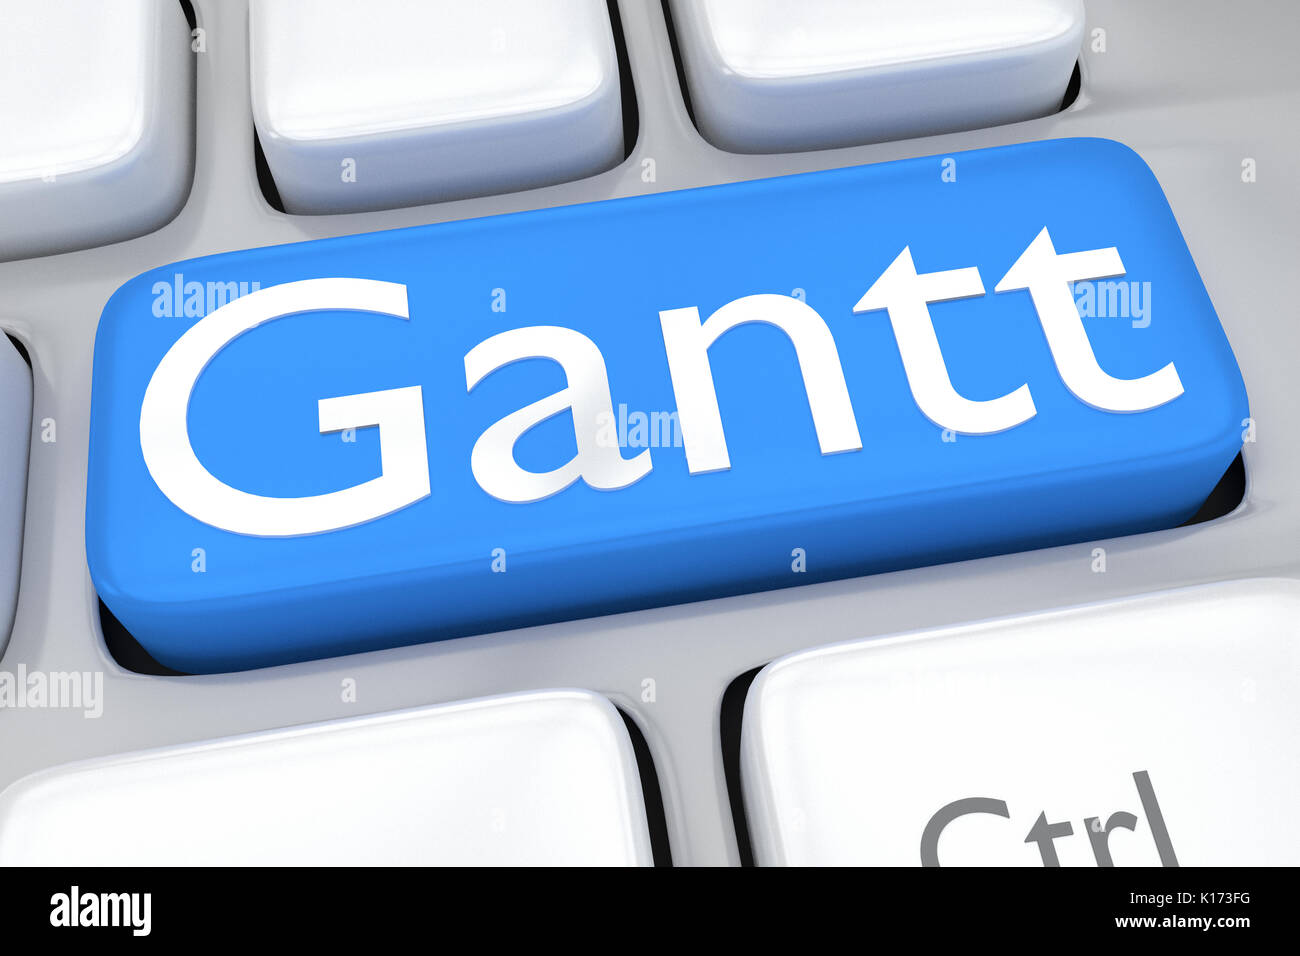 3D illustration of computer keyboard with the script 'Gantt' on pale blue button Stock Photo